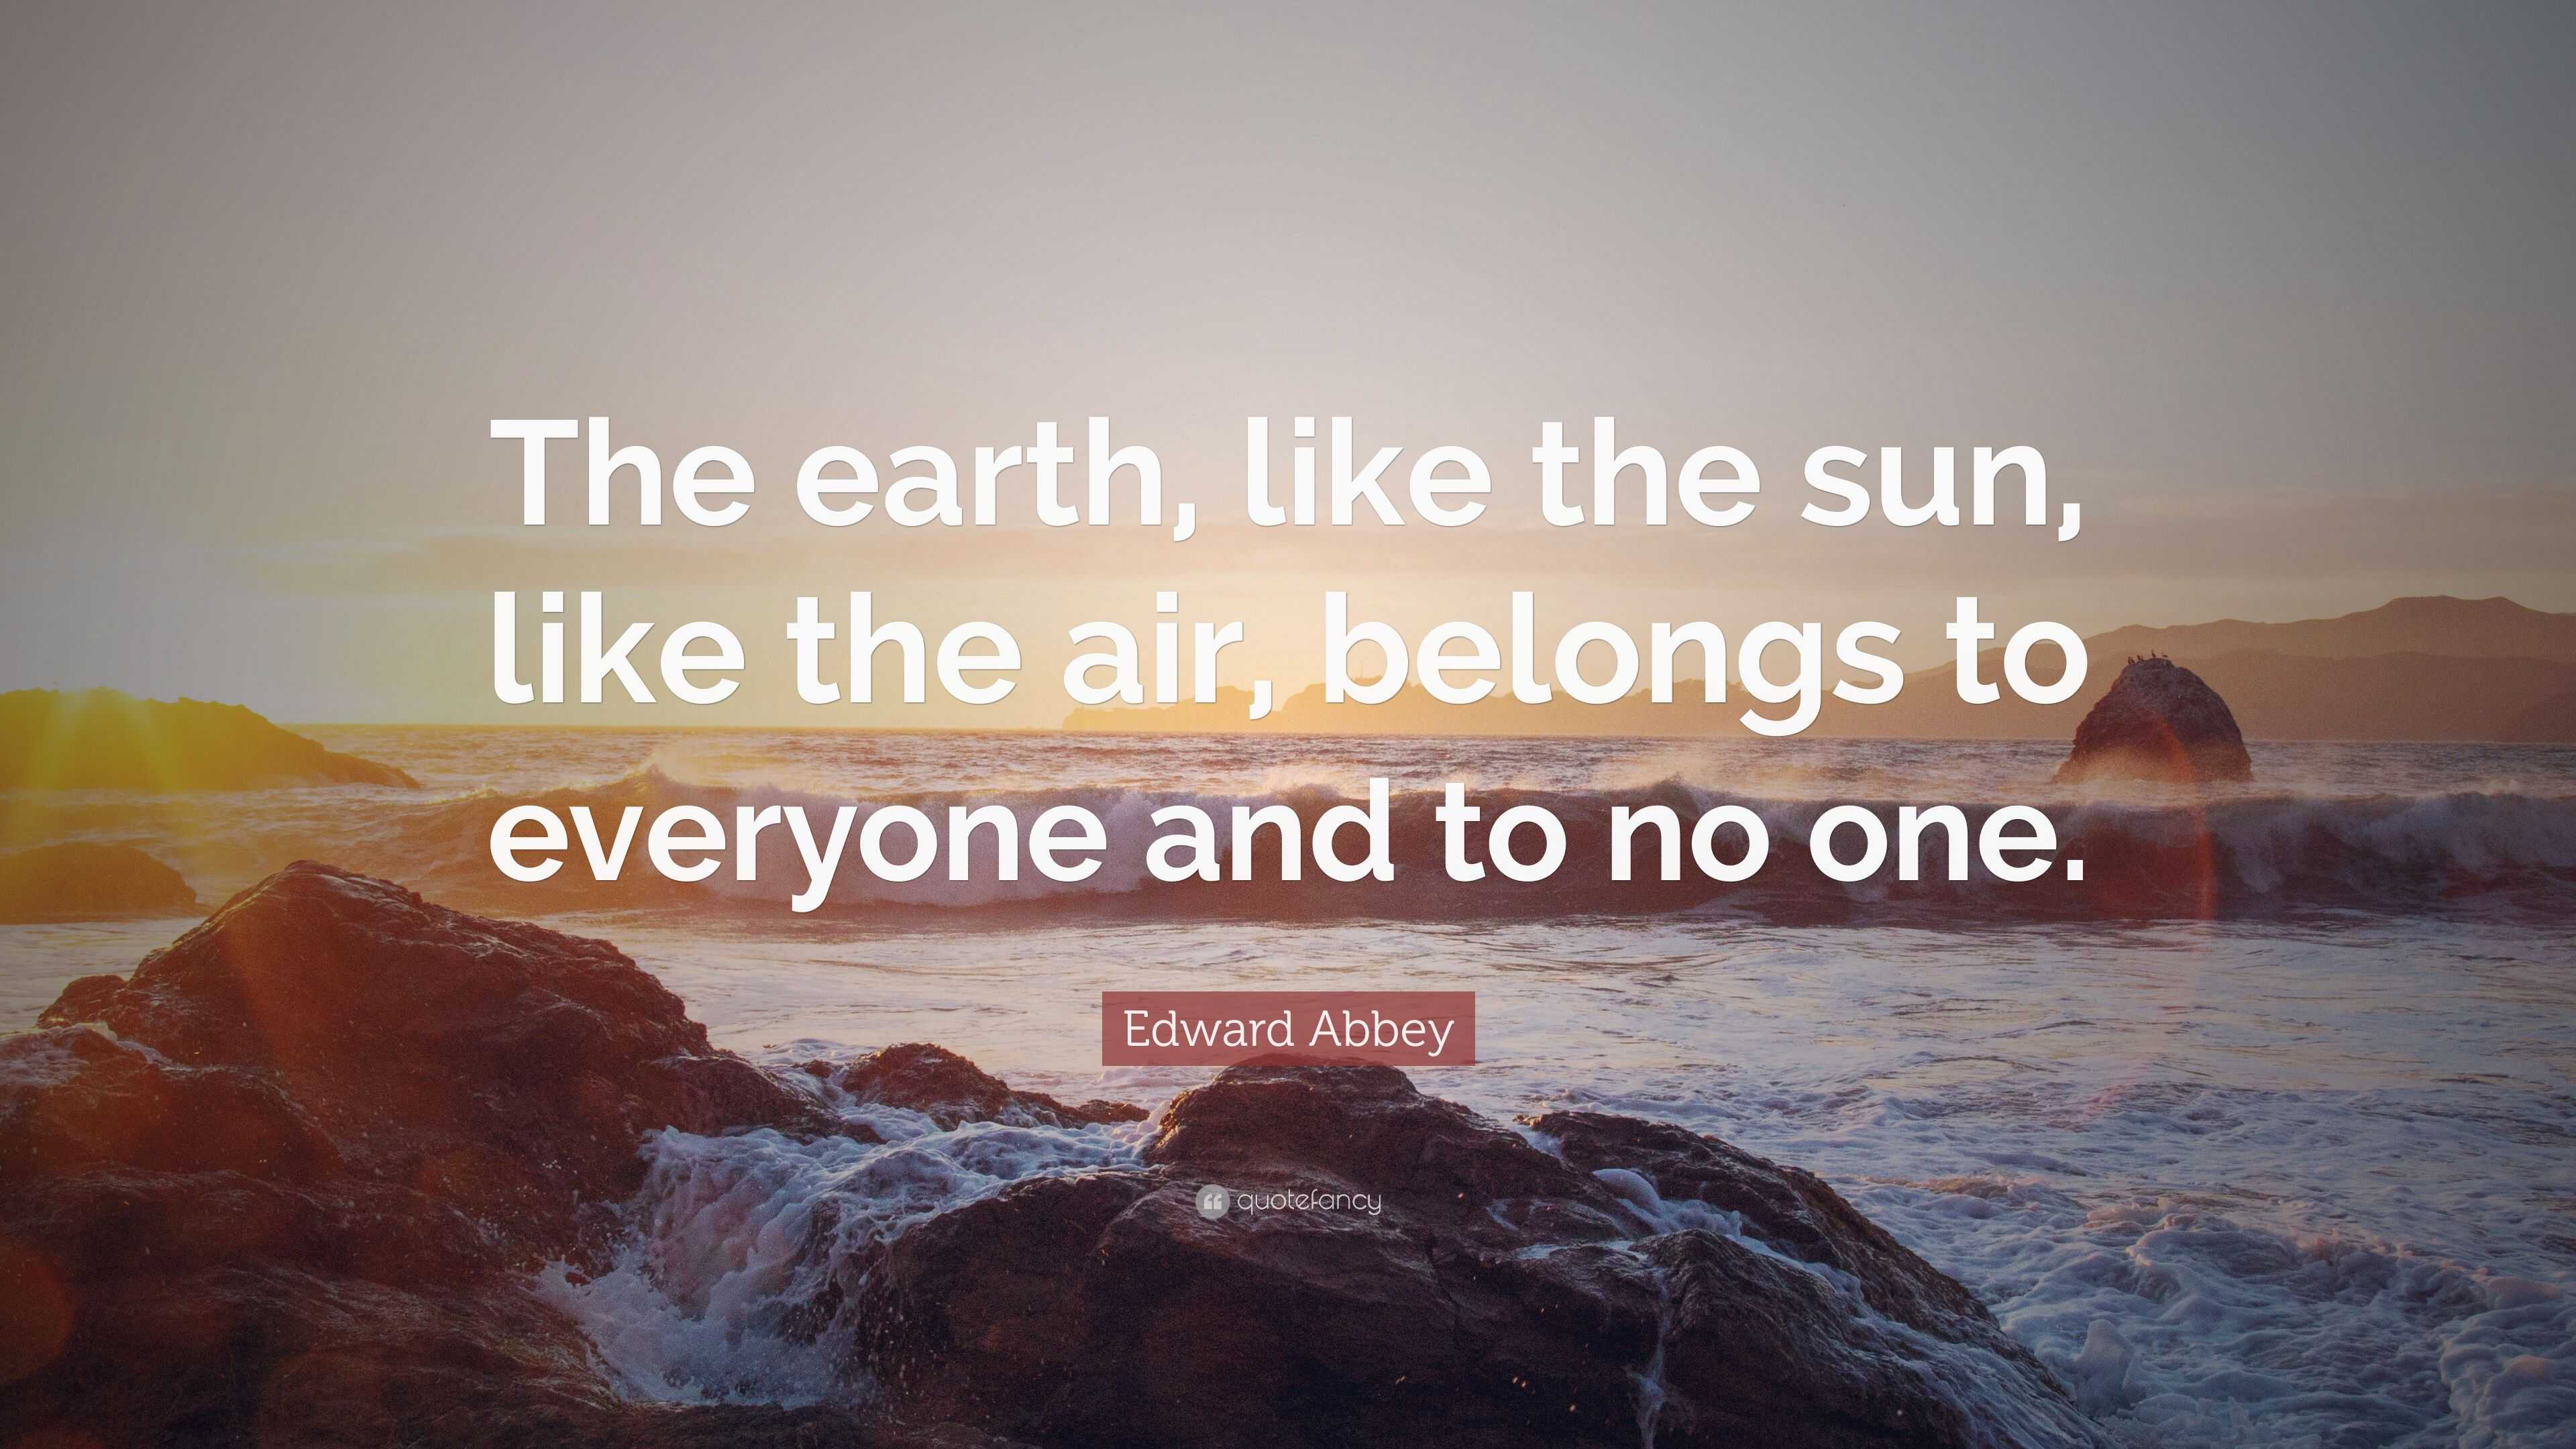 Edward Abbey Quote The Earth Like The Sun Like The Air Belongs To Everyone And To No One